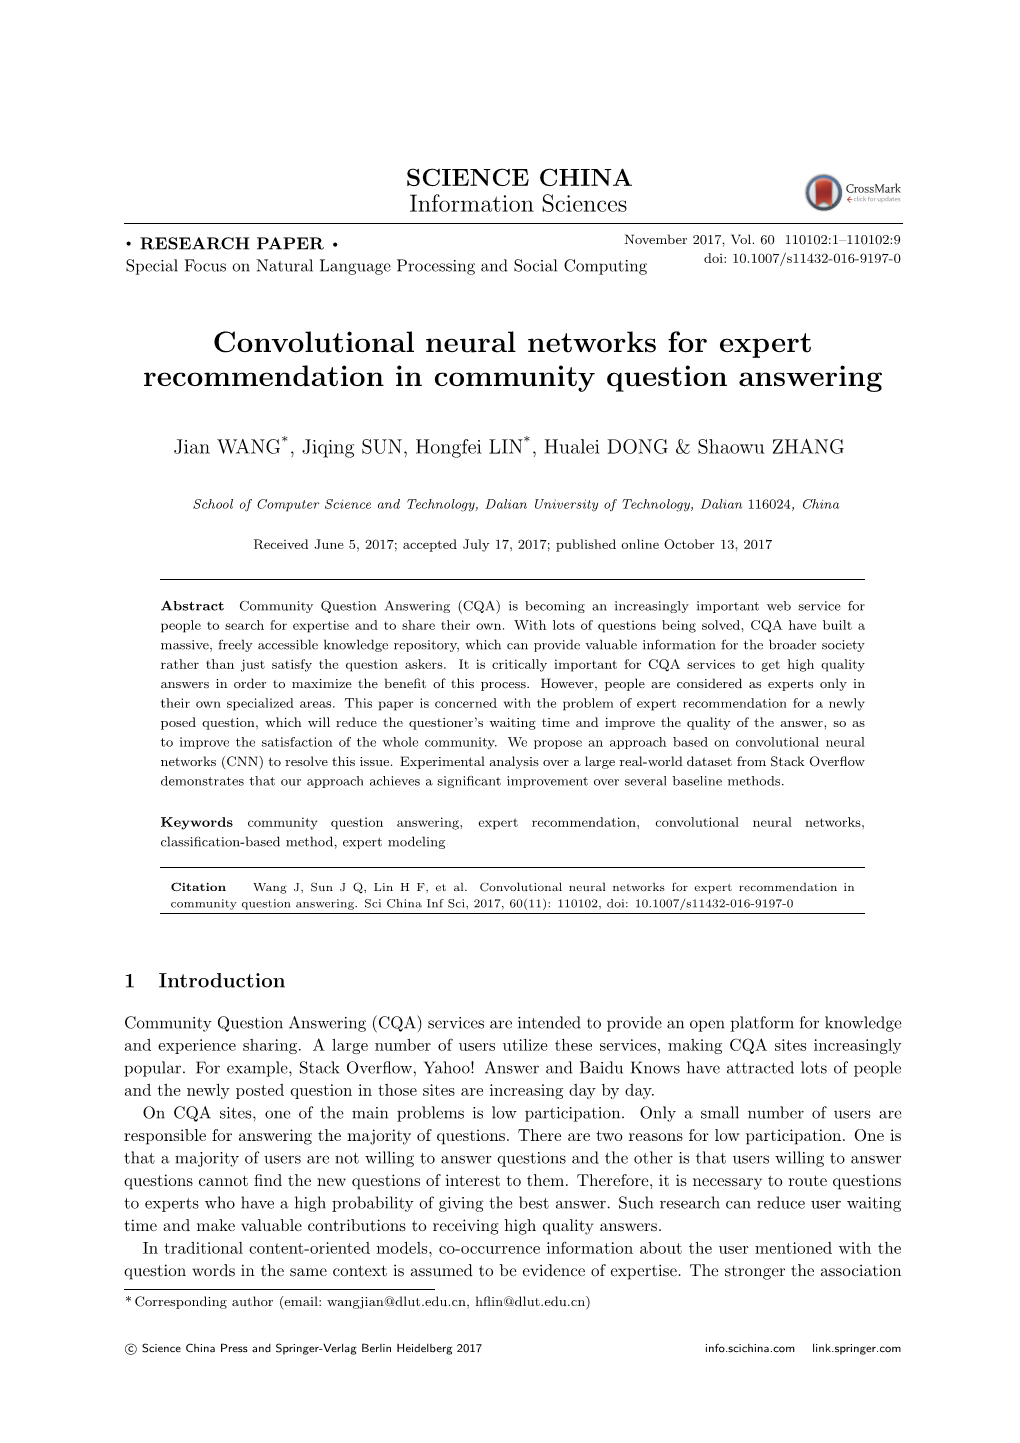 Convolutional Neural Networks for Expert Recommendation in Community Question Answering